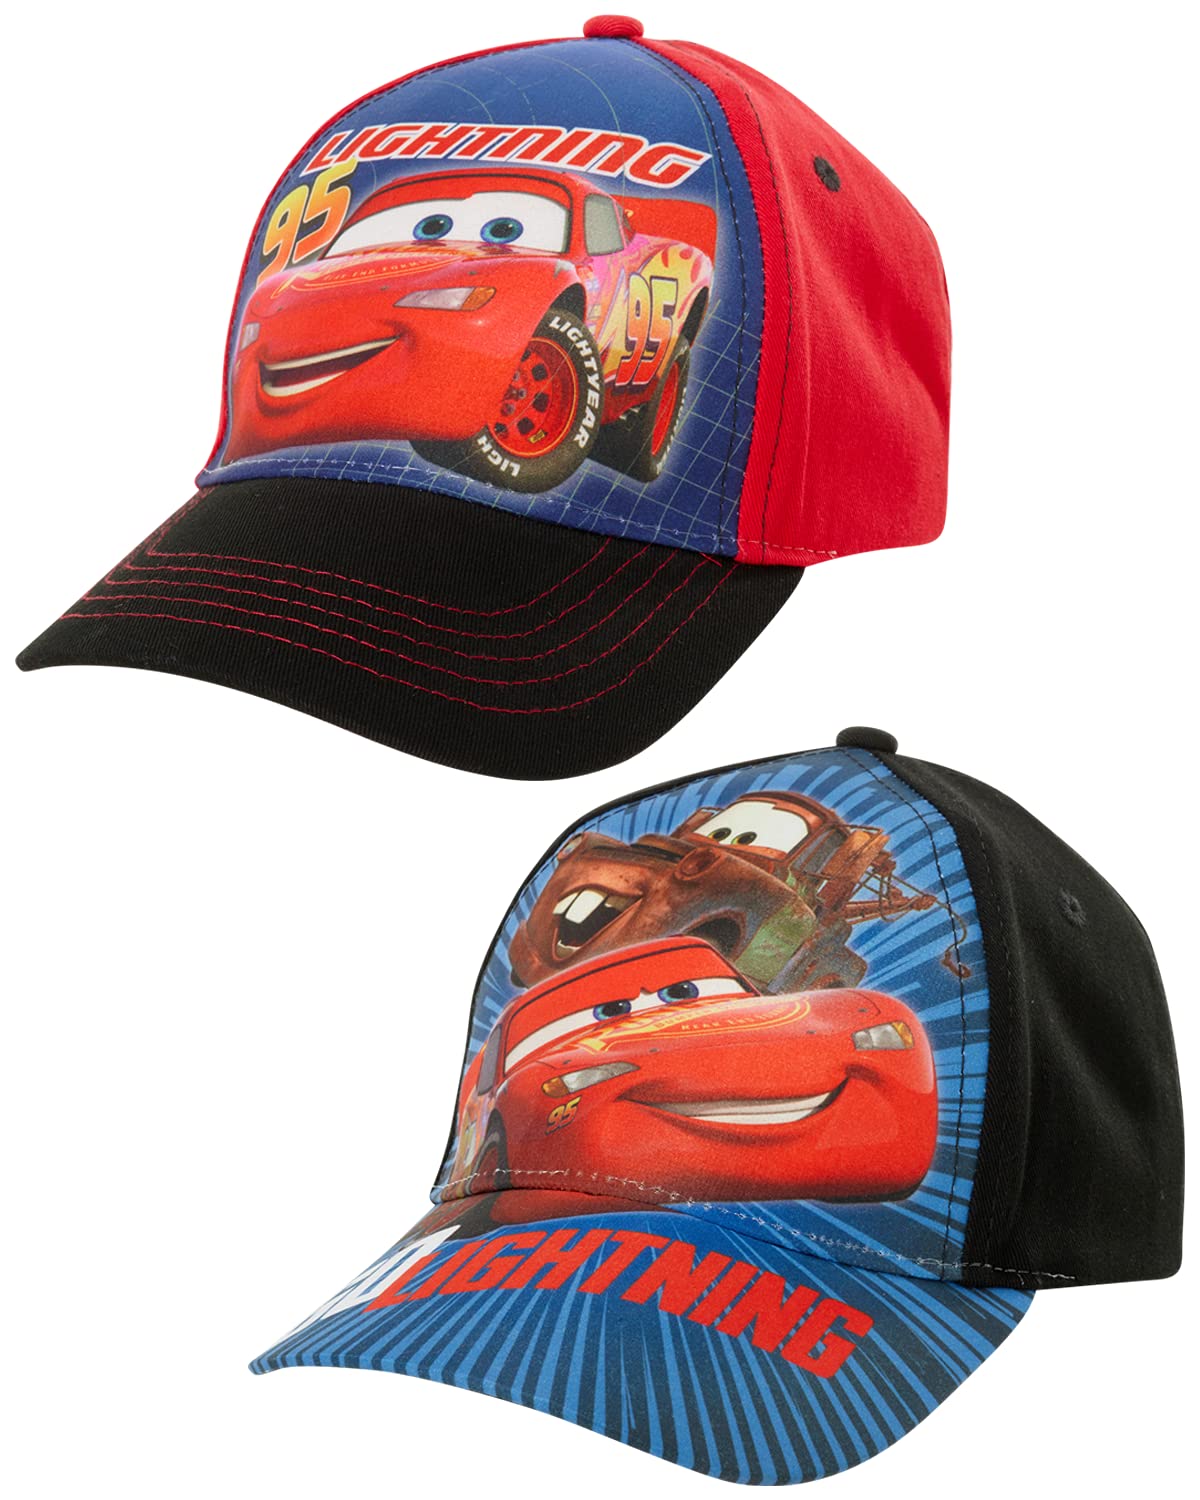 Disney Boys Cars Lightning McQueen Cotton Baseball Cap 2 Pack (Ages 2-7)  Cars Red and Black 4-7 Years